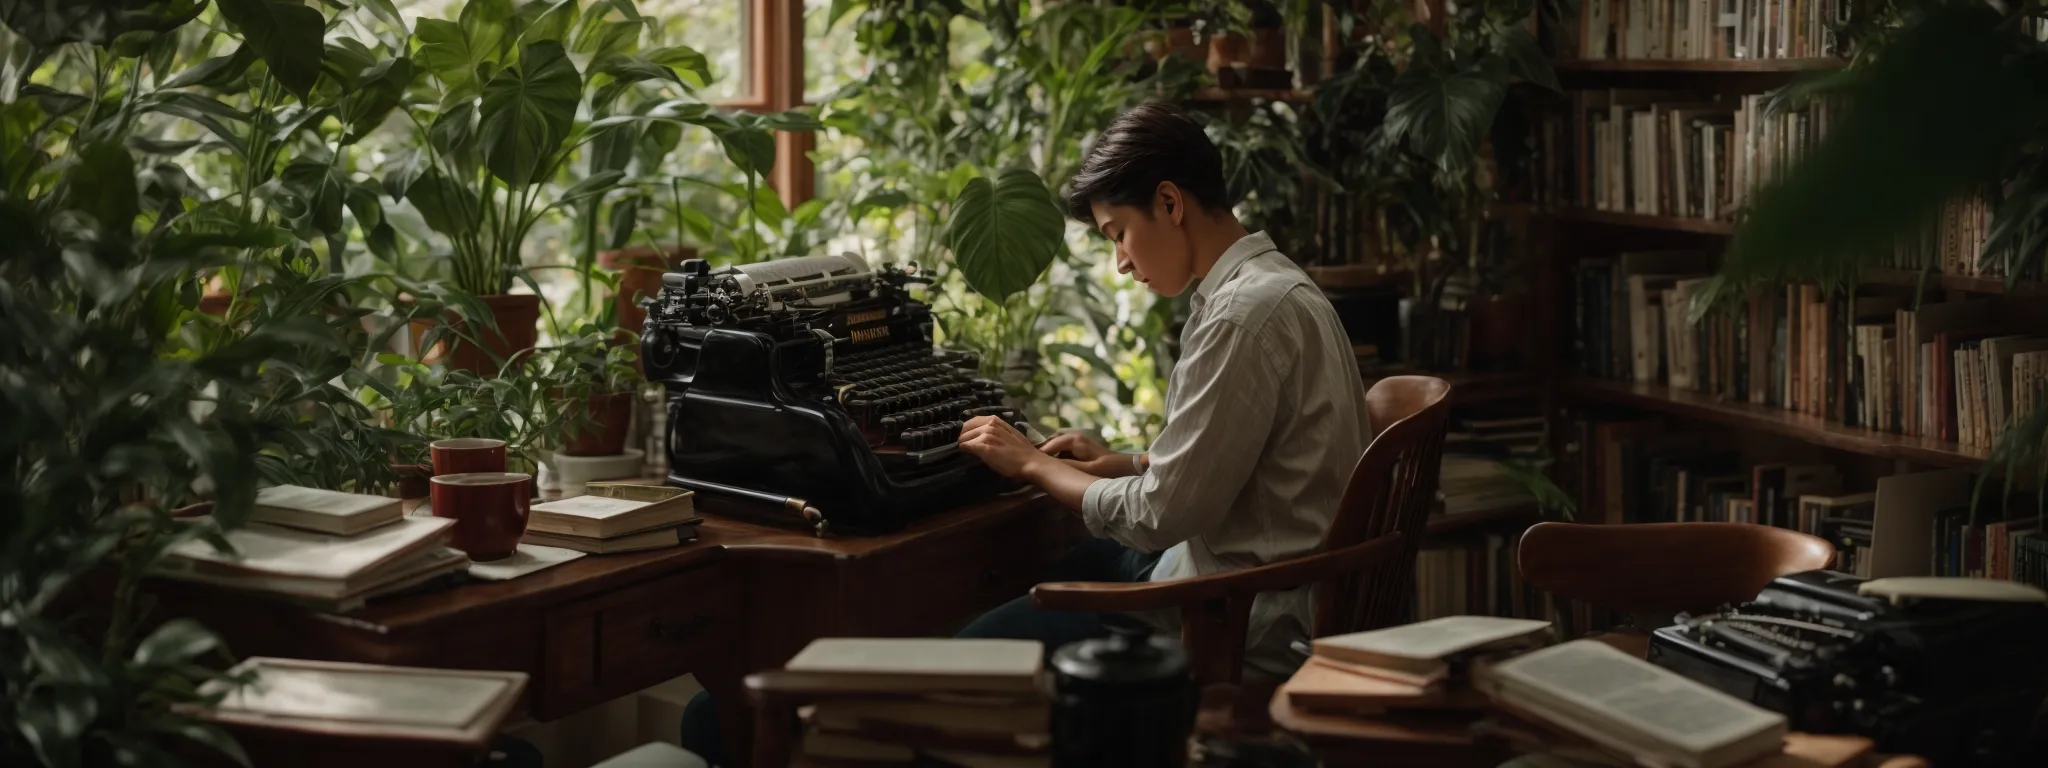 a writer in a cozy study filled with books types intently on a vintage typewriter, surrounded by lush plants and soft lighting that creates an inviting atmosphere for content creation.